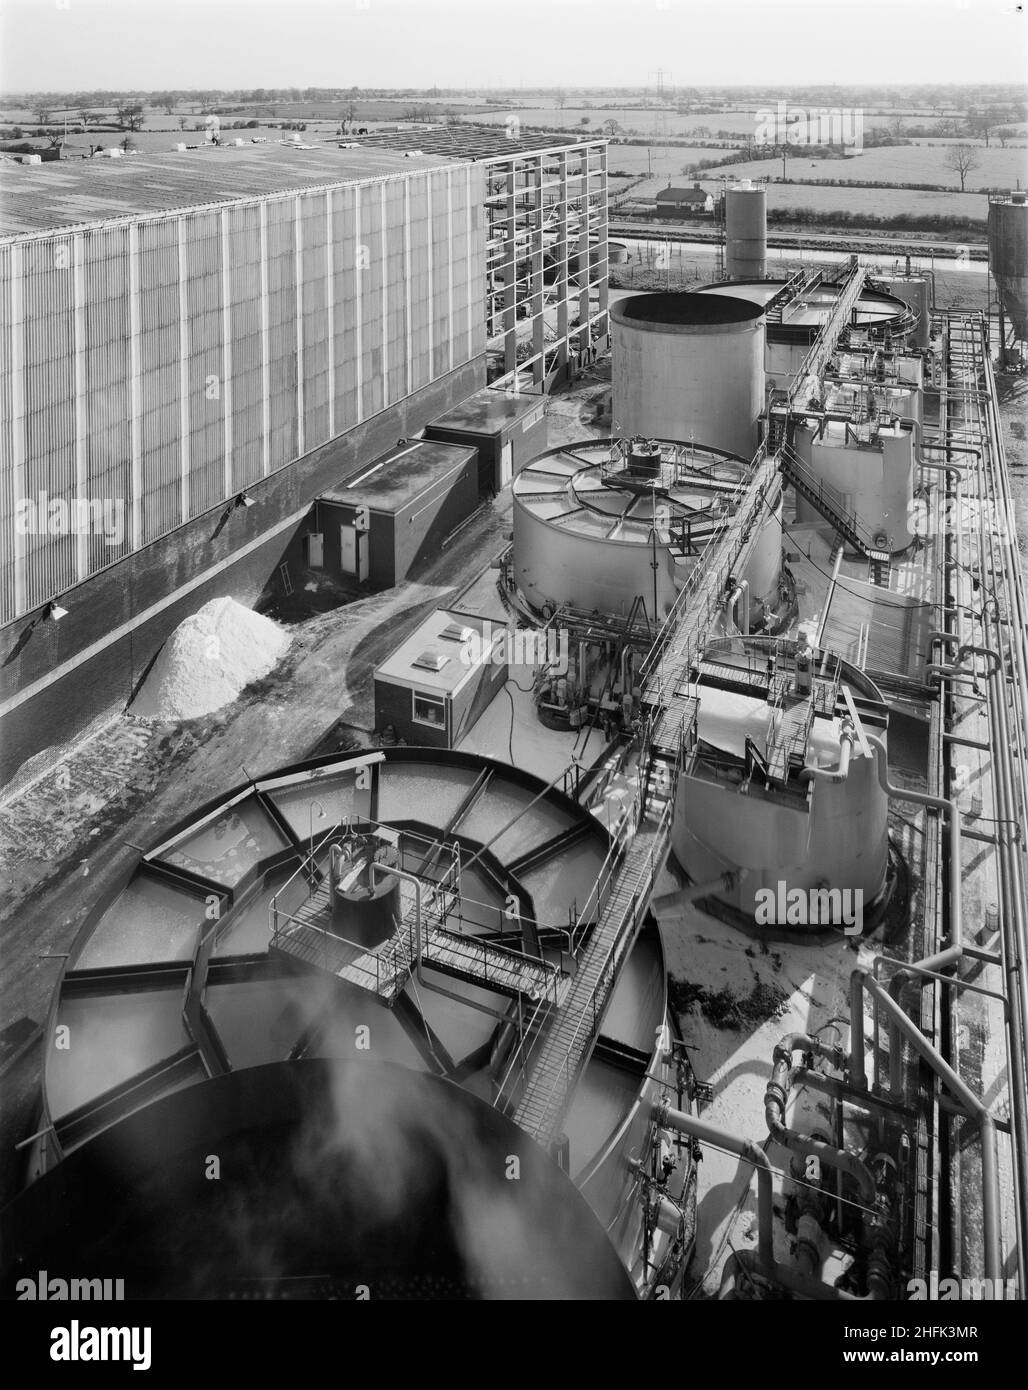 British Salt Factory, Faulkner Lane, Middlewich, Cheshire, 28/04/1971. The brine clarification plant at the British Salt factory. Work began on site on the 16th of April 1968 and was completed in early June 1969 with the factory officially opened by the Duke of Edinburgh on the 25th. It was the first industrial water treatment plant completed in the UK to use a system developed by Laing's French partner company, Degremont. This photograph was used in the December 1971 issue of Team Spirit, the Laing company newsletter. Stock Photo